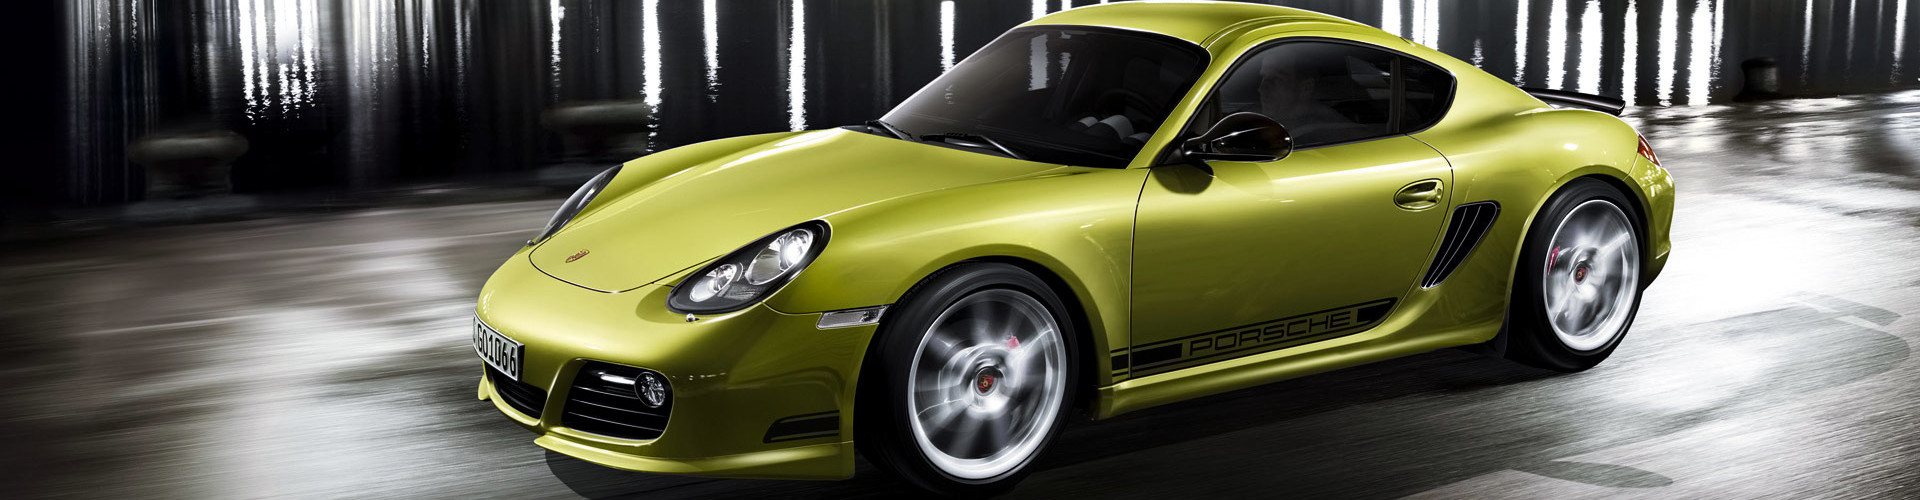 Used Porsche Cayman Buying Guide